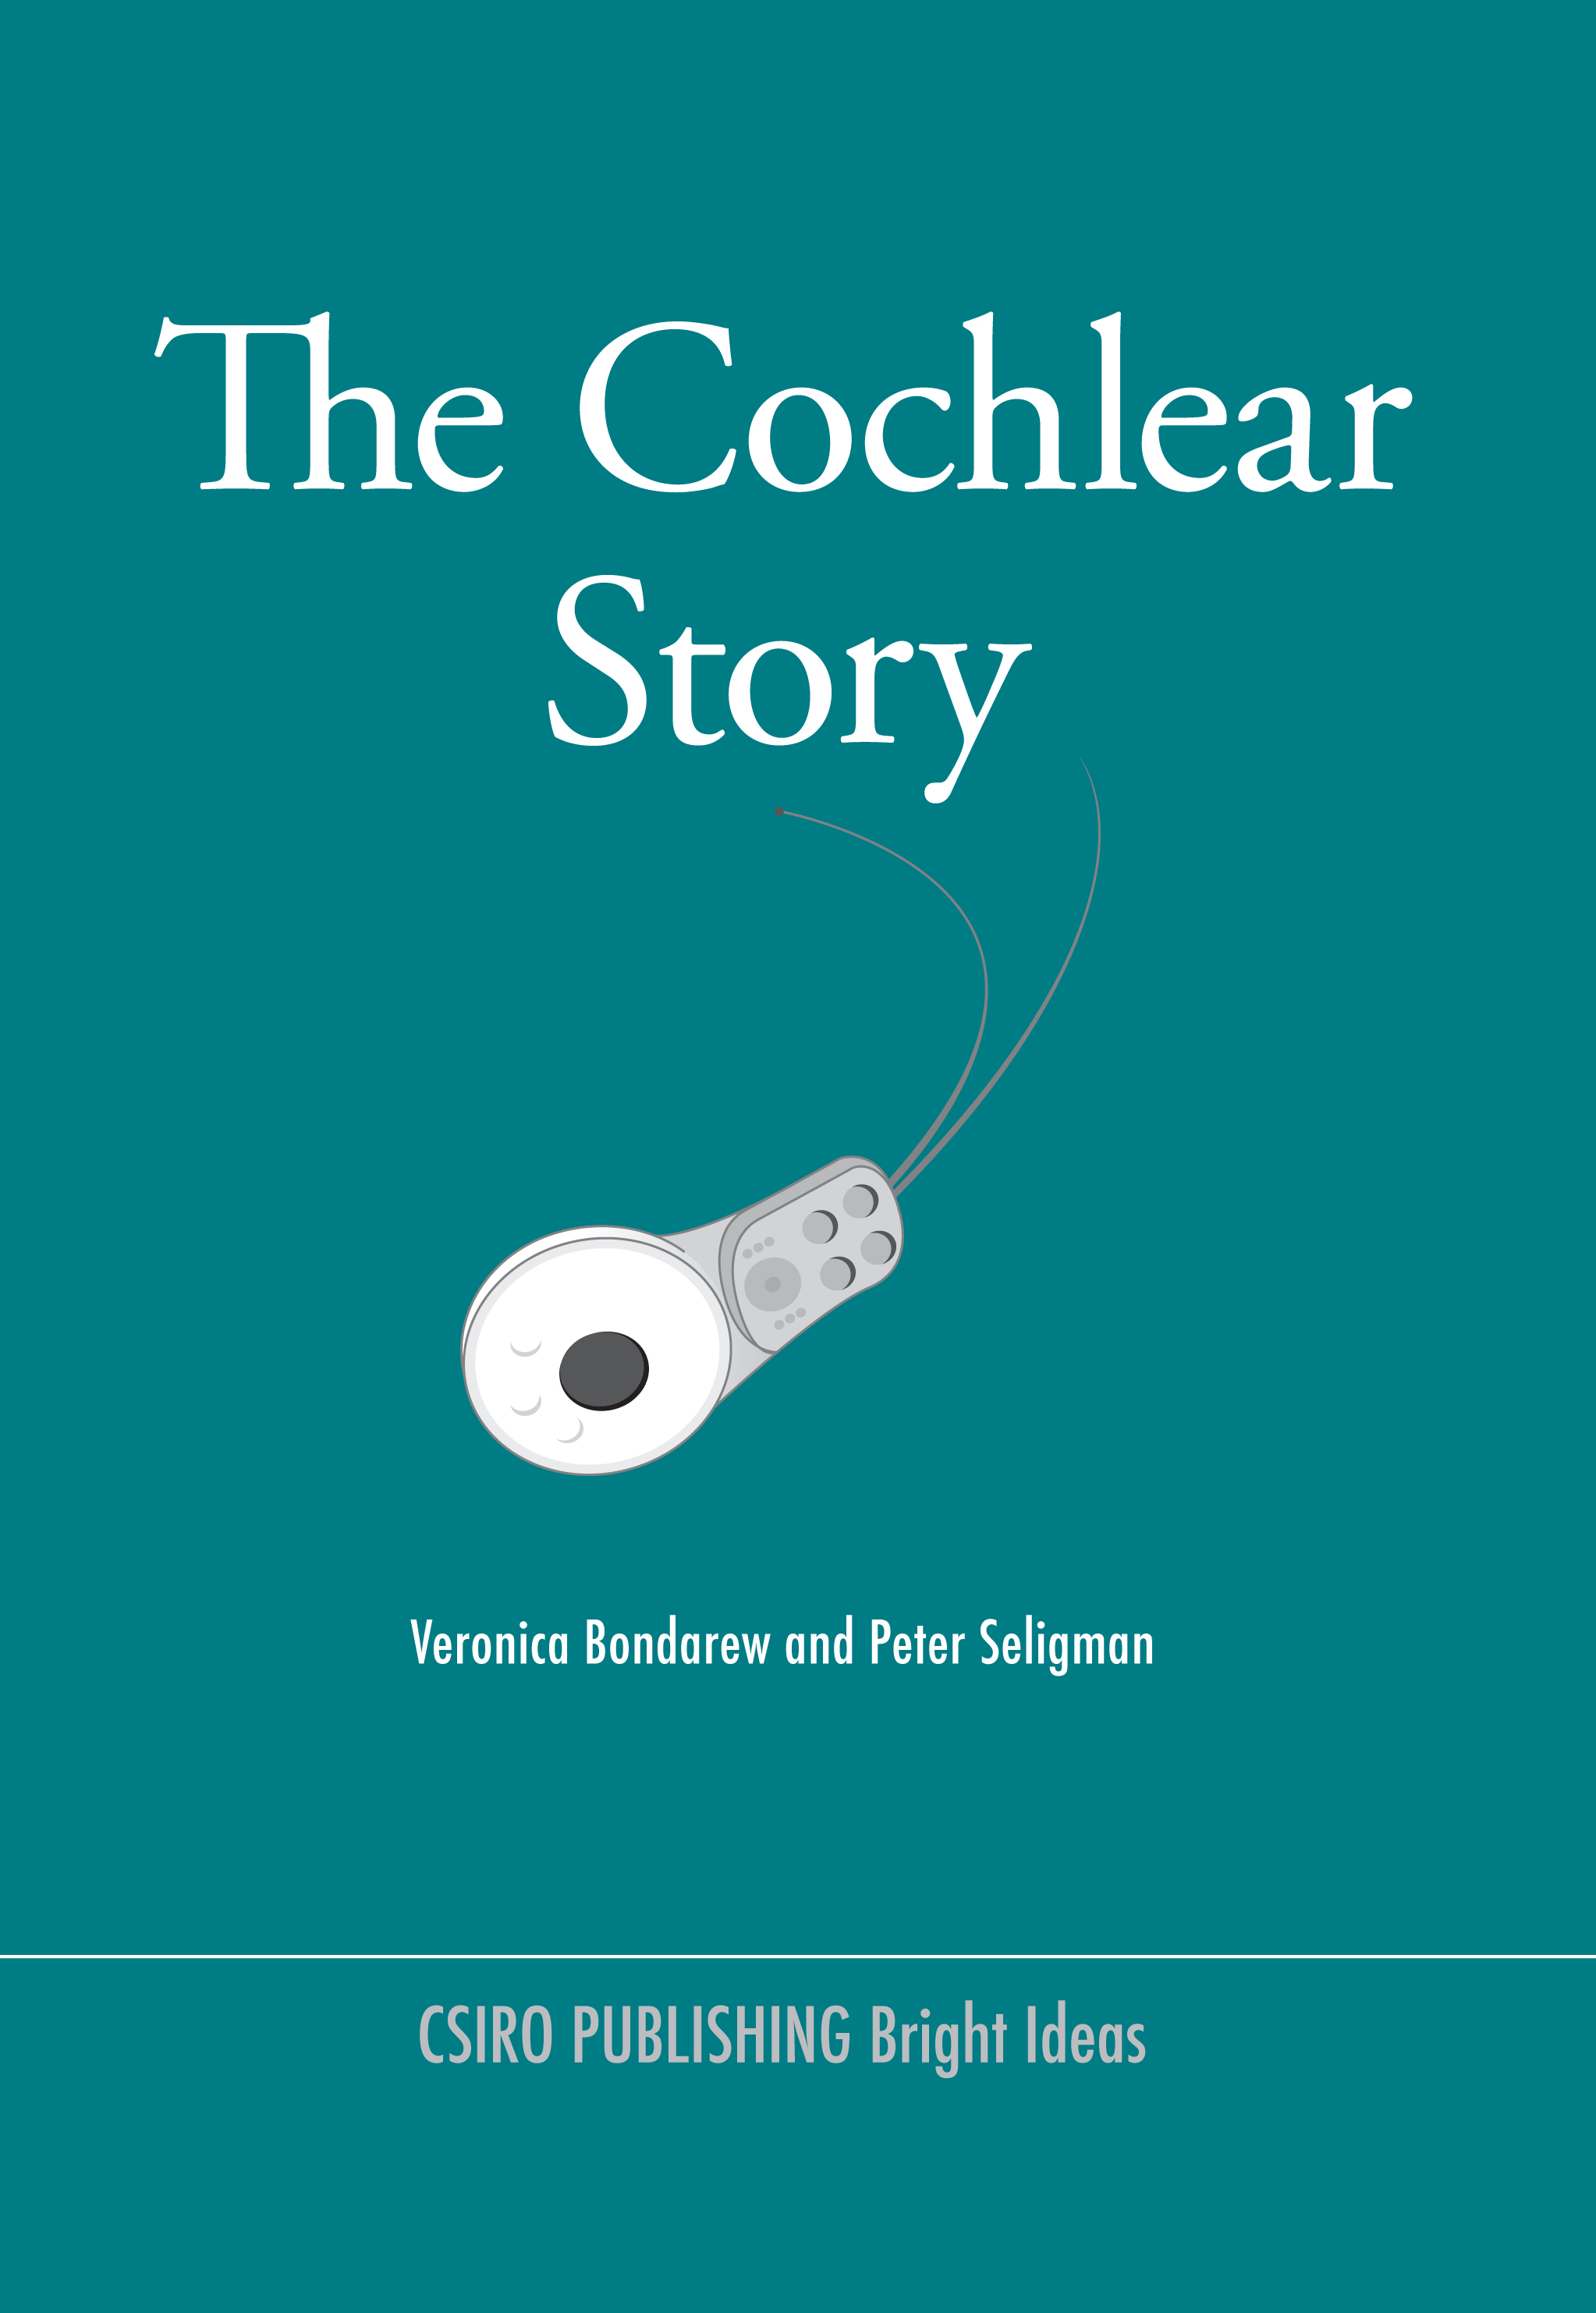 The cover image of The Cochlear Story, featuring a white cochlear hearing device set against a plain aqua green background.